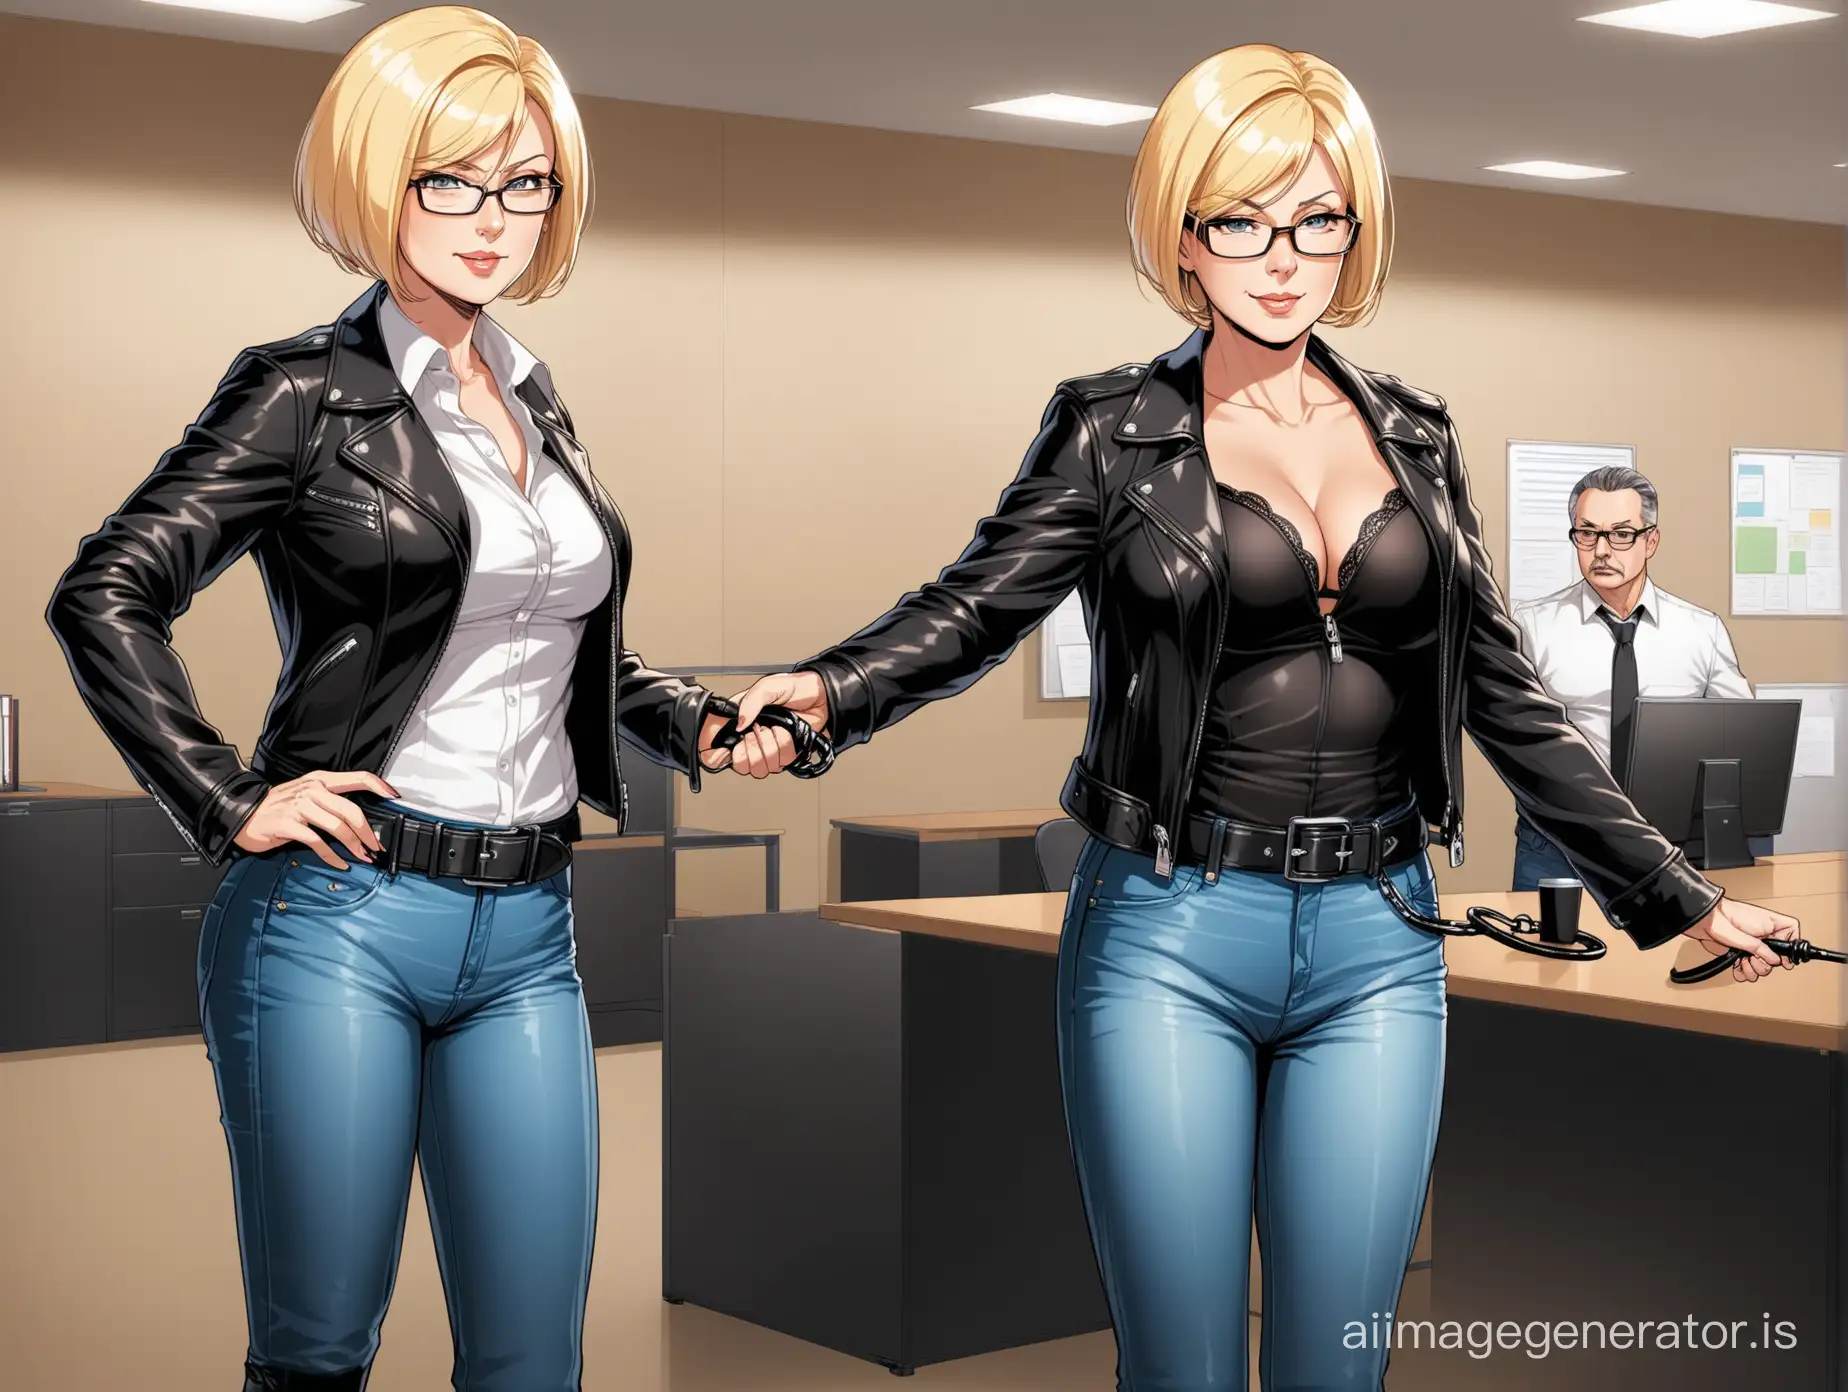 Dominant-Blonde-Mistresses-in-Leather-and-Jeans-Exuding-Authority-in-an-Office-Setting